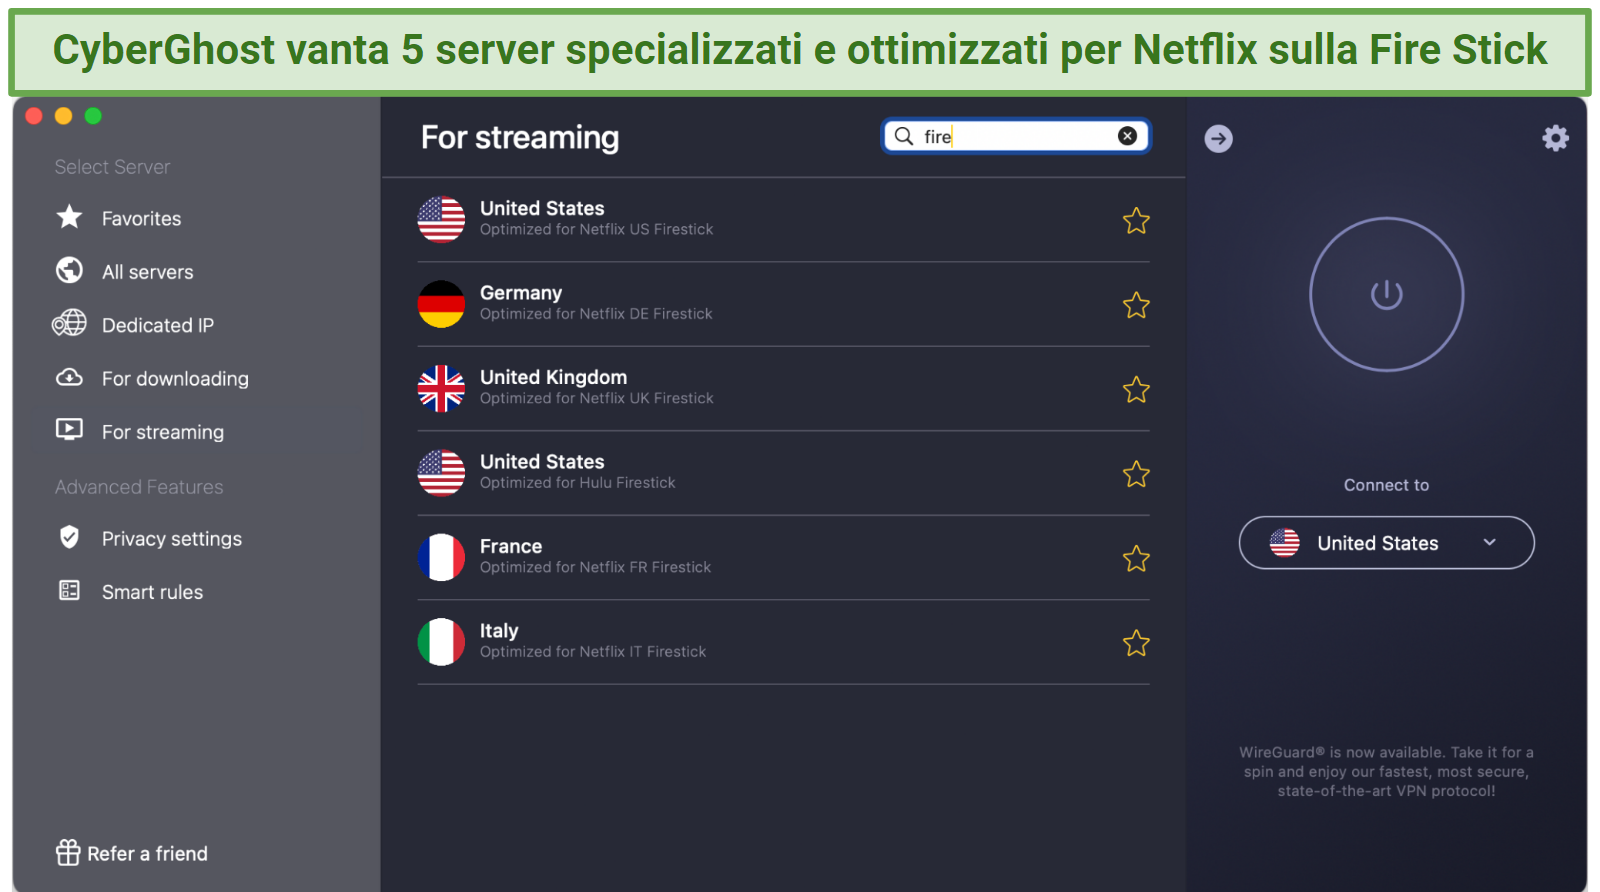 Screenshot of the Netflix for Fire Stick specialty servers on the CyberGhost app